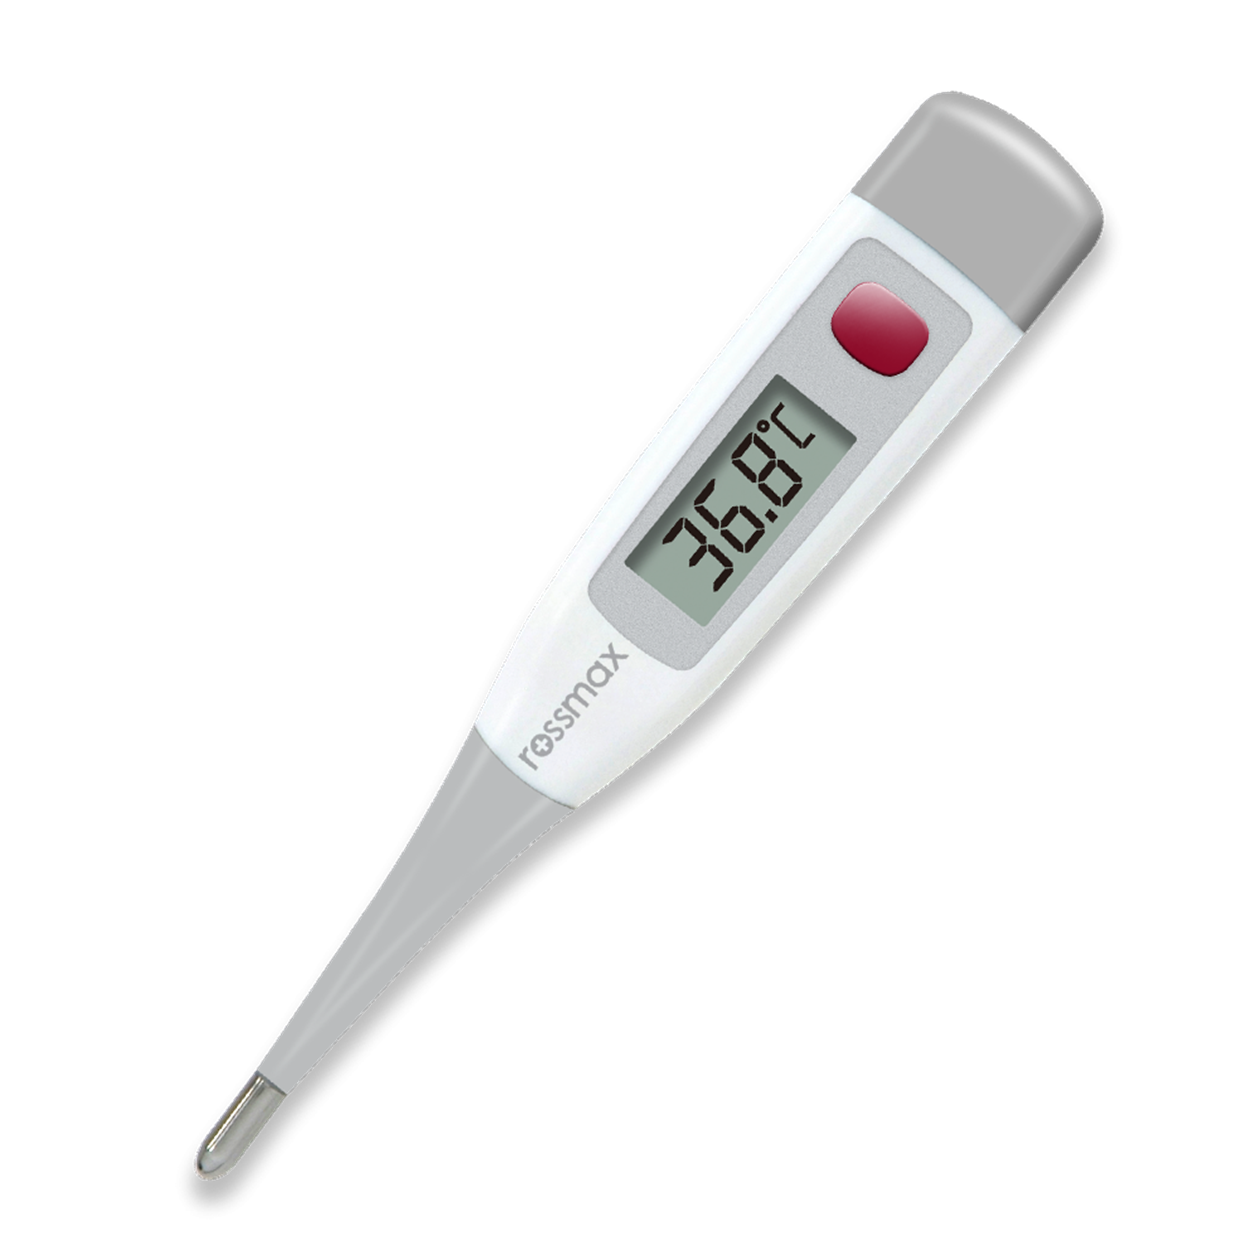 Rossmax Flexible Thermometer TG380 (Delivery Product)